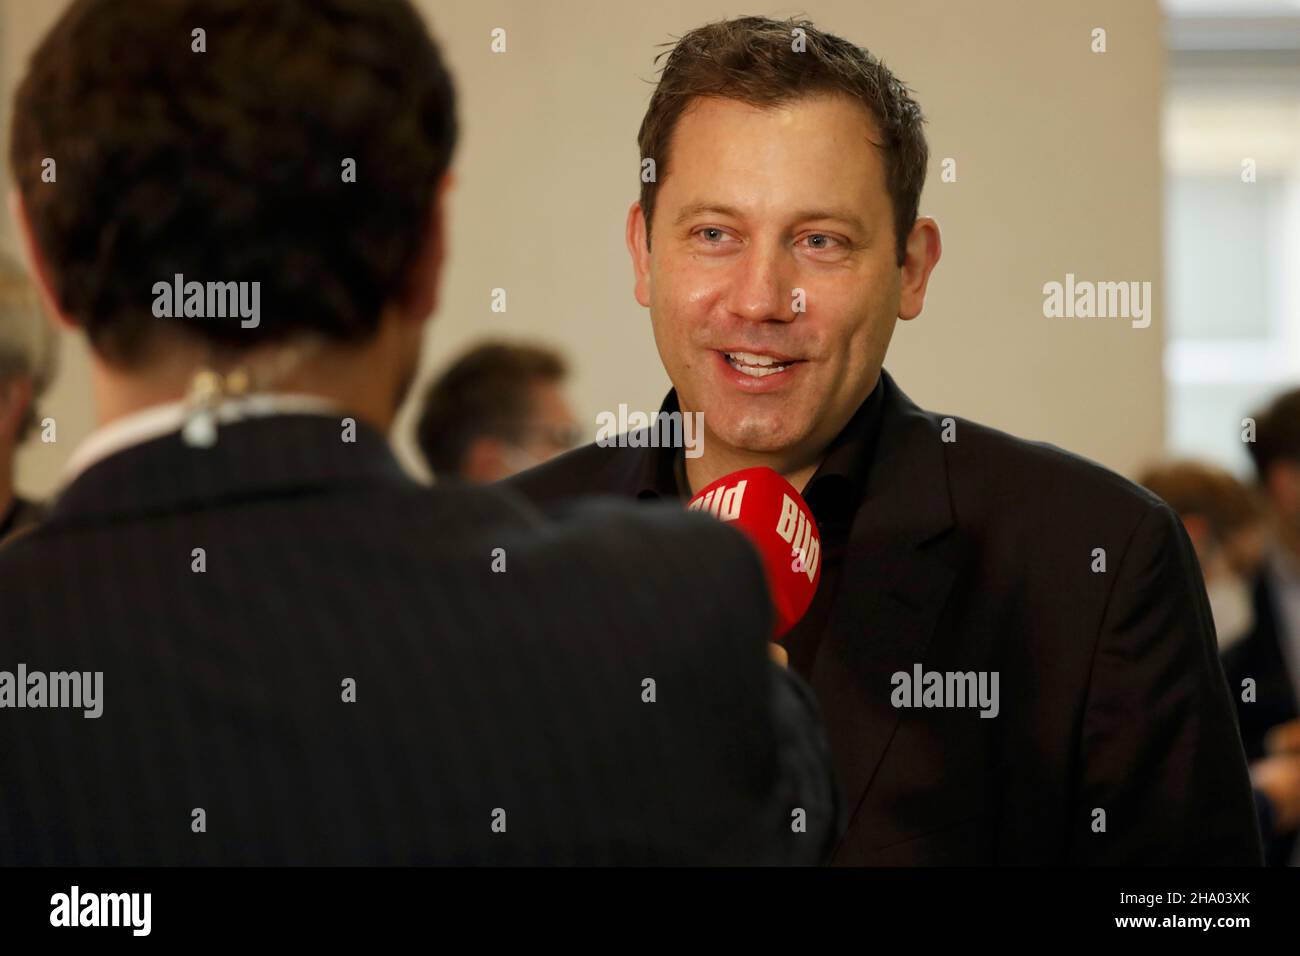 Berlin, Germany, December 8, 2021. Lars Klingbeil during an interview in the German Bundestag on the occasion of the election of Olaf Scholz. Stock Photo